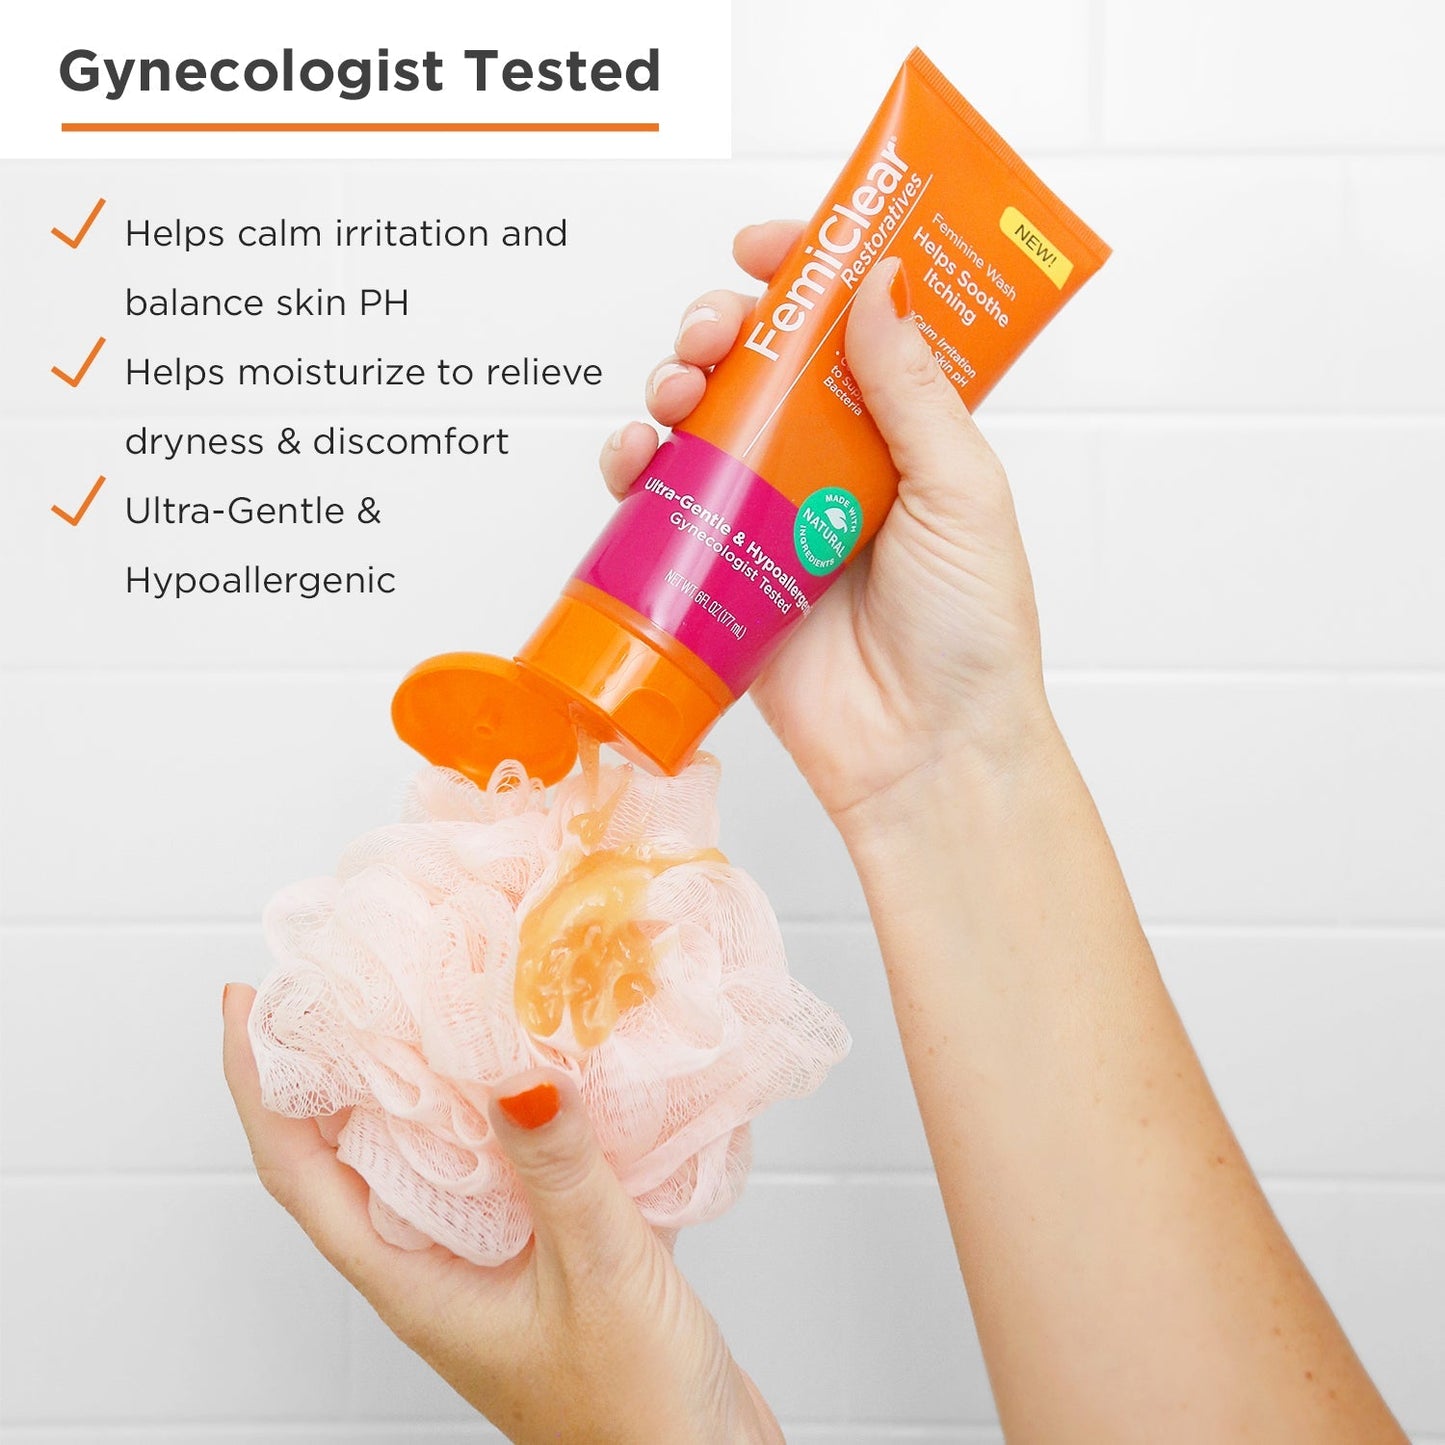 Gynecologist Tested Vaginal Wash helps with Vaginal PH and Yeast Infection Treatment